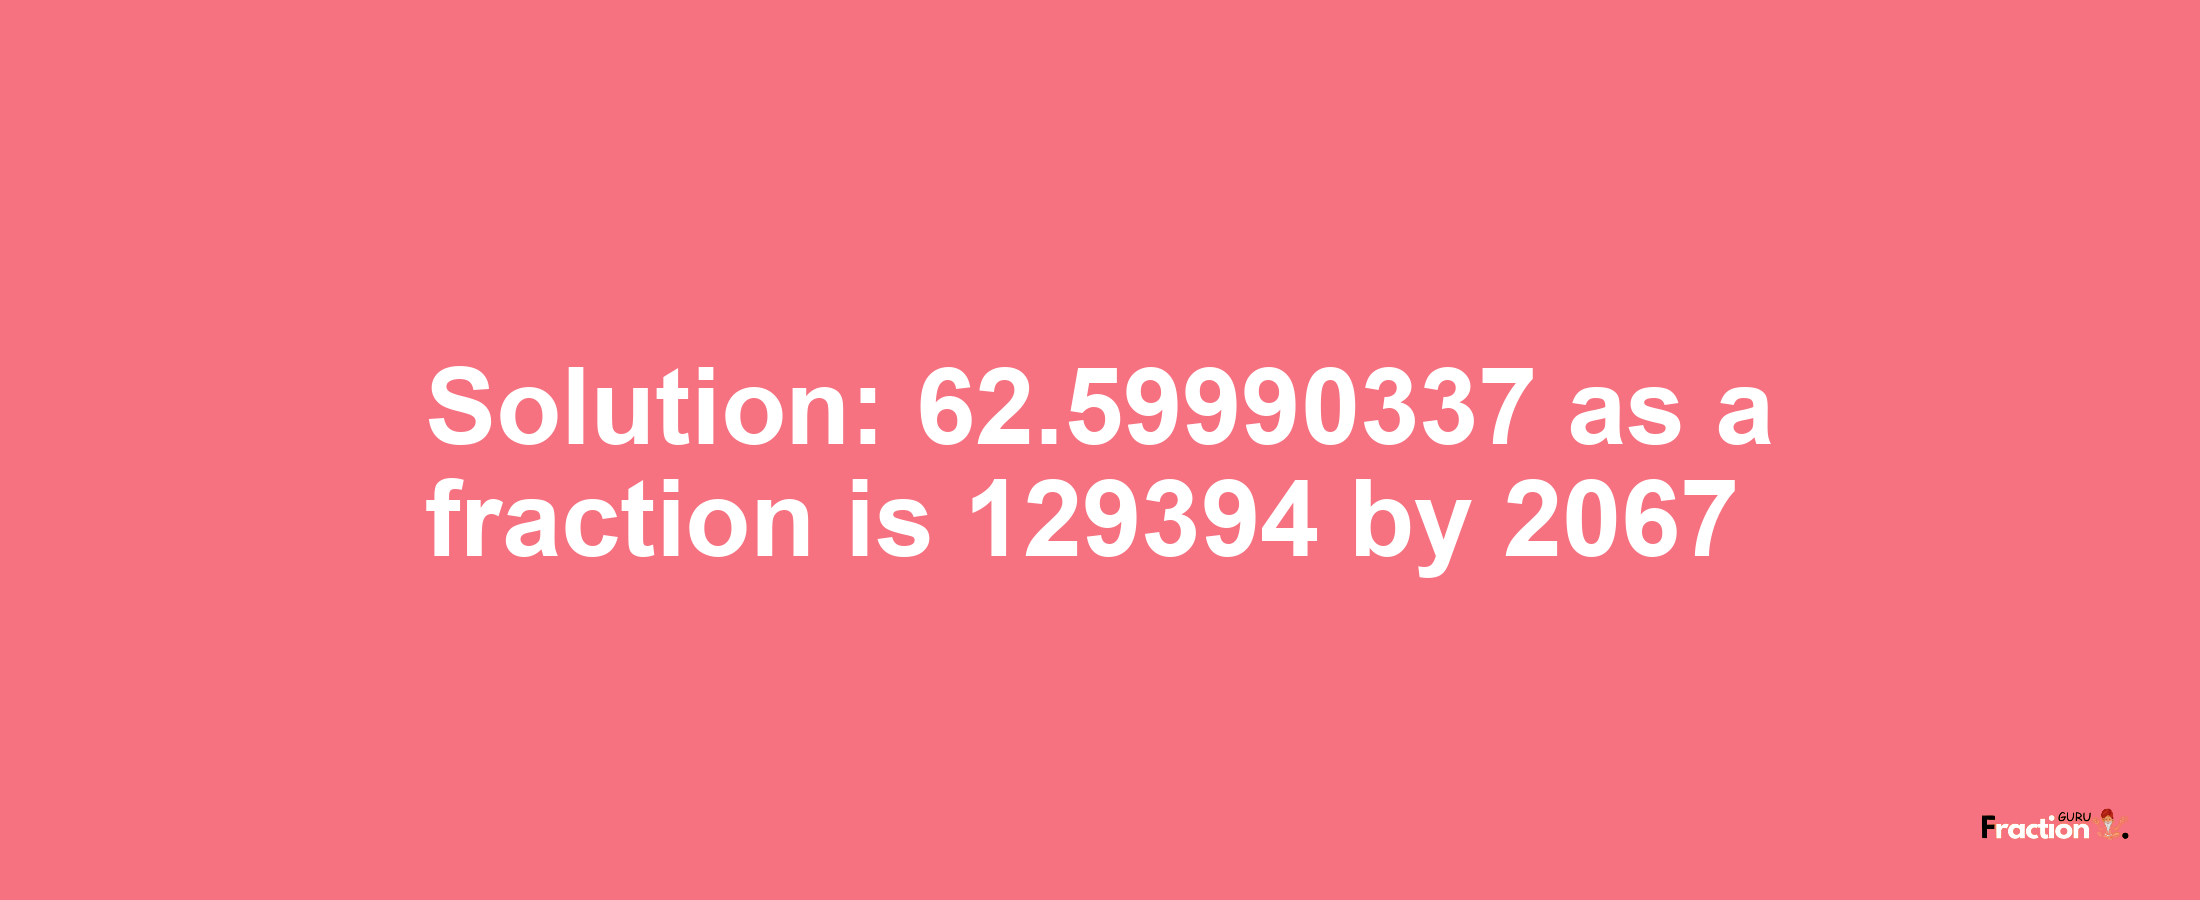 Solution:62.59990337 as a fraction is 129394/2067